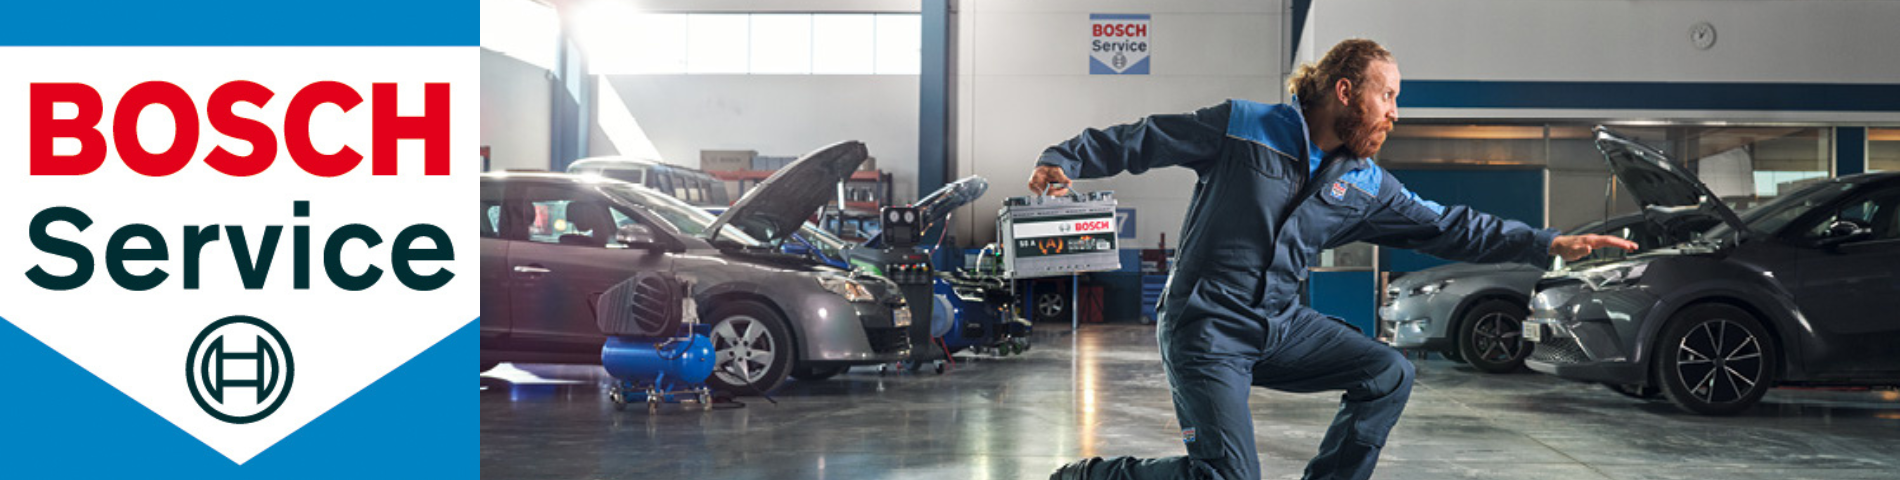 Bosch Car Service for all makes and models